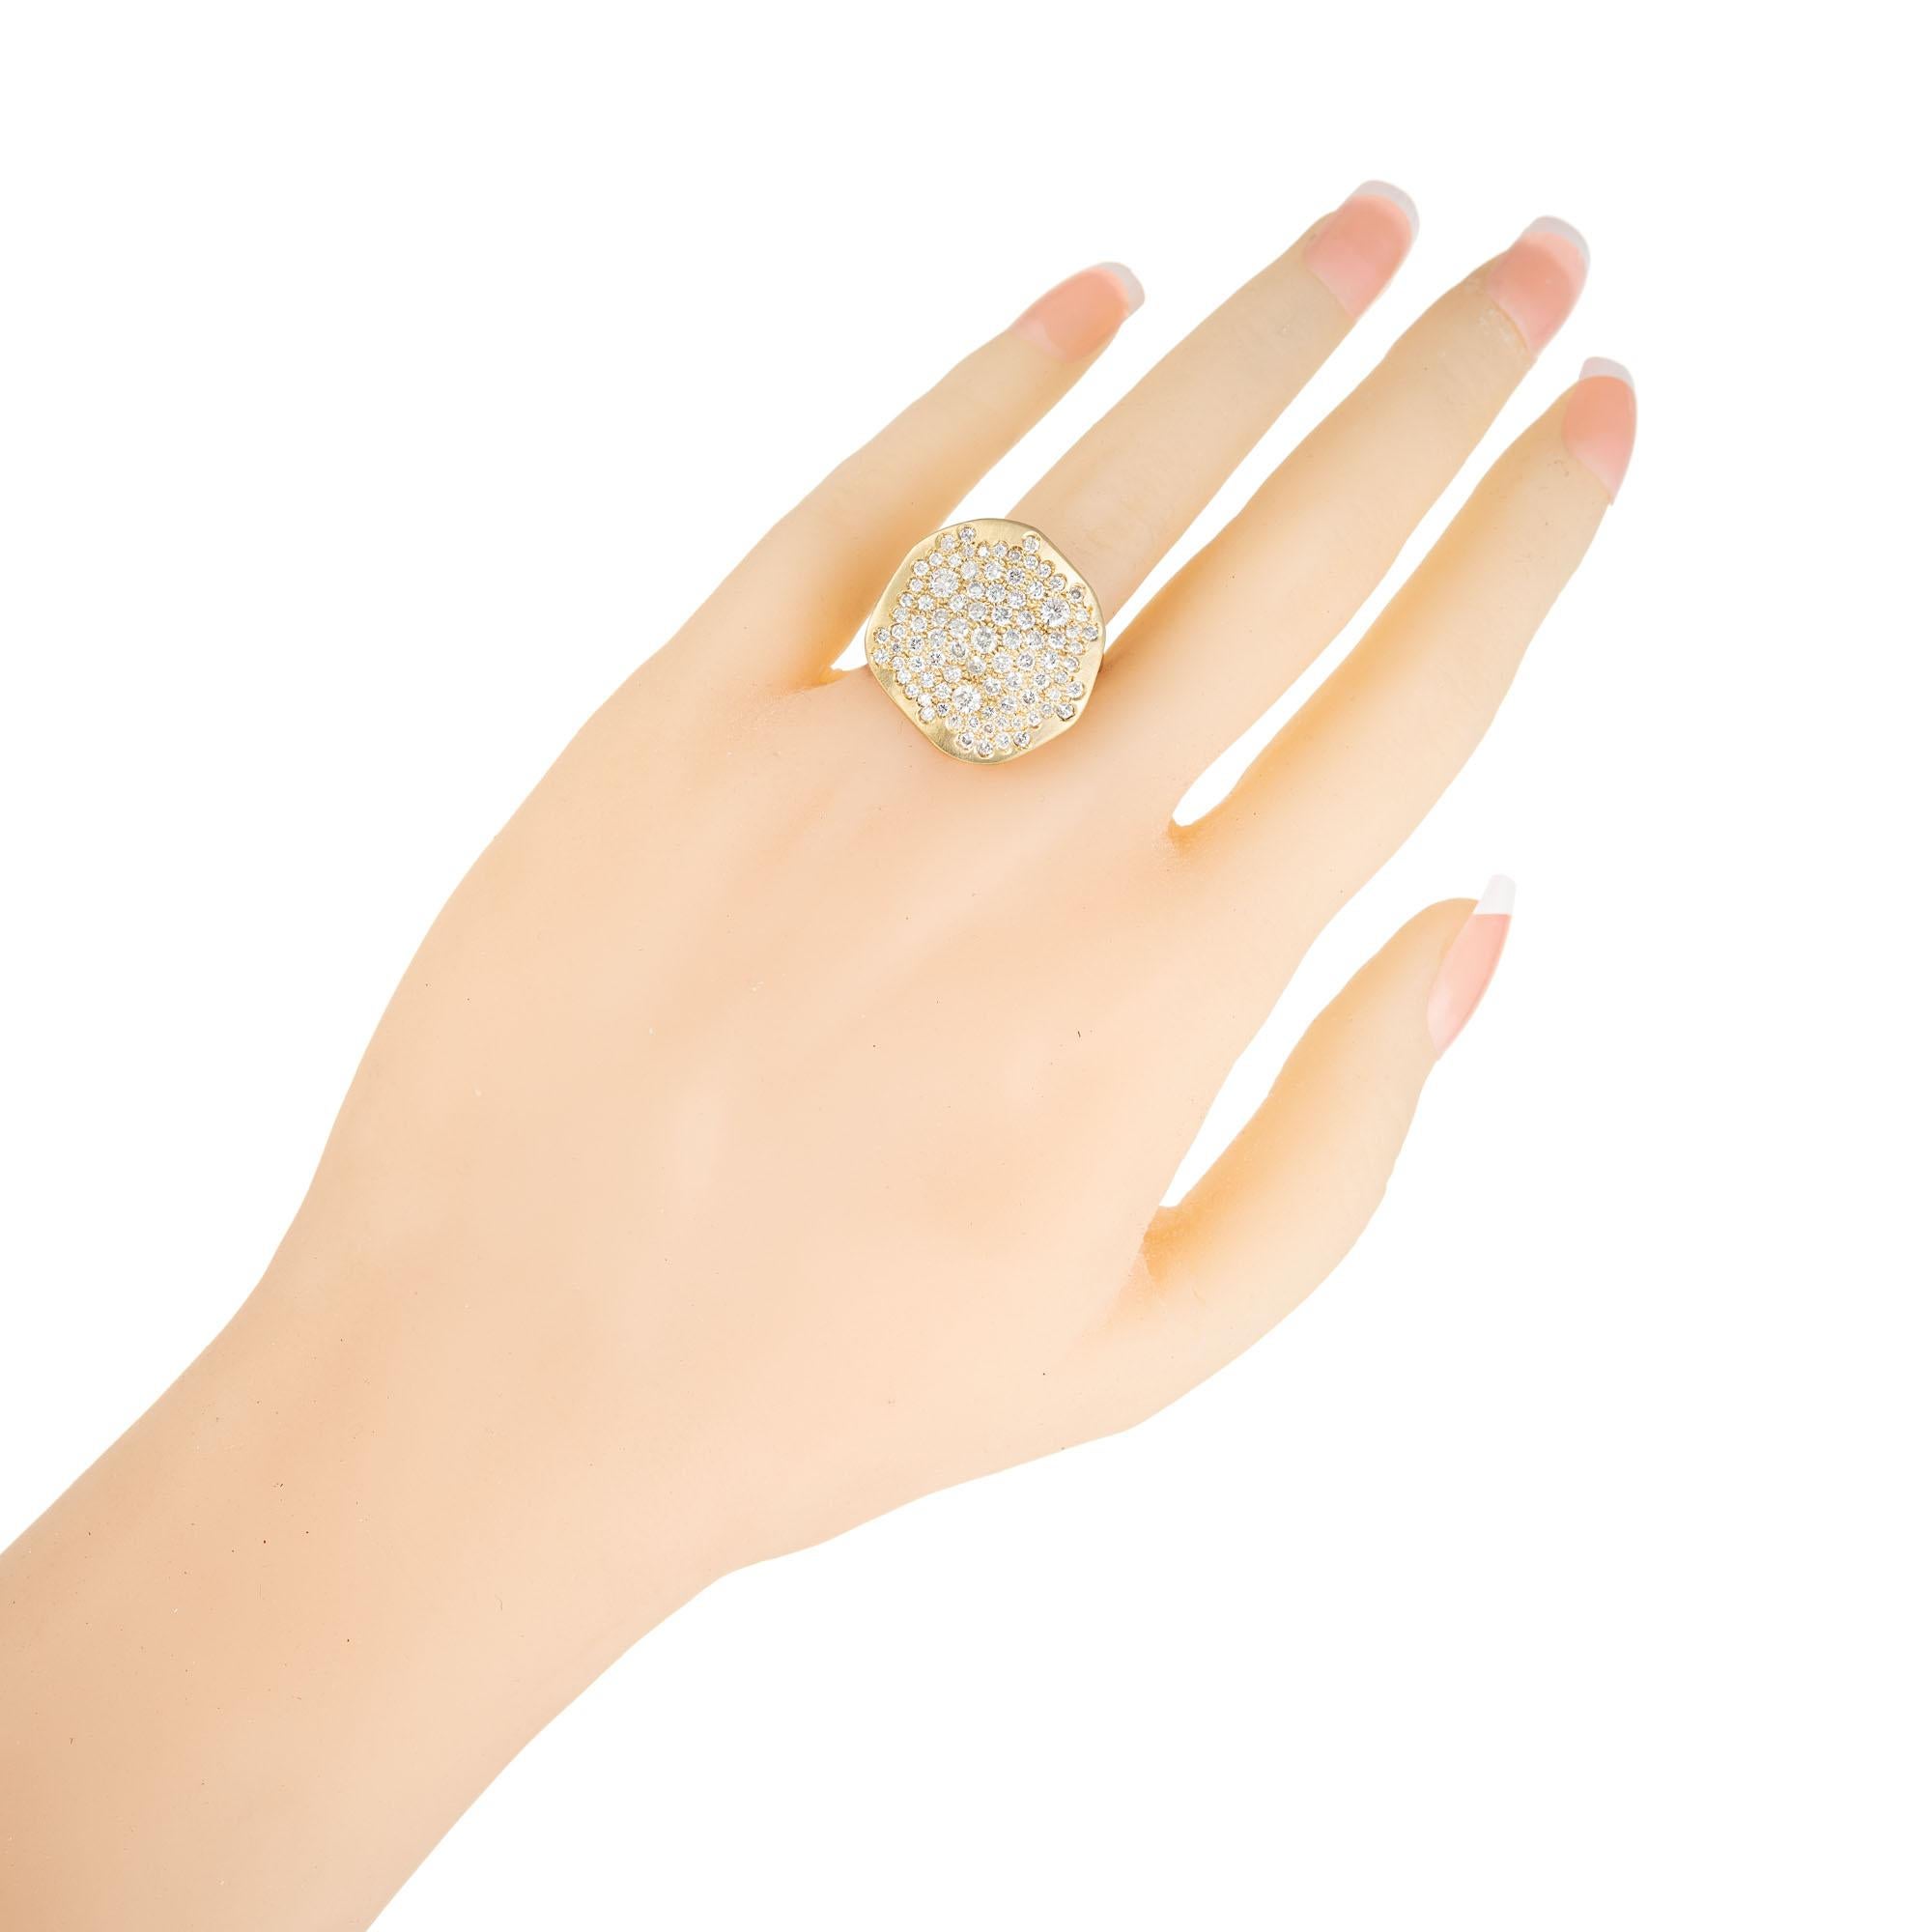  2.04 Carat Pave Diamond Asymmetrical Cocktail Ring For Sale 2